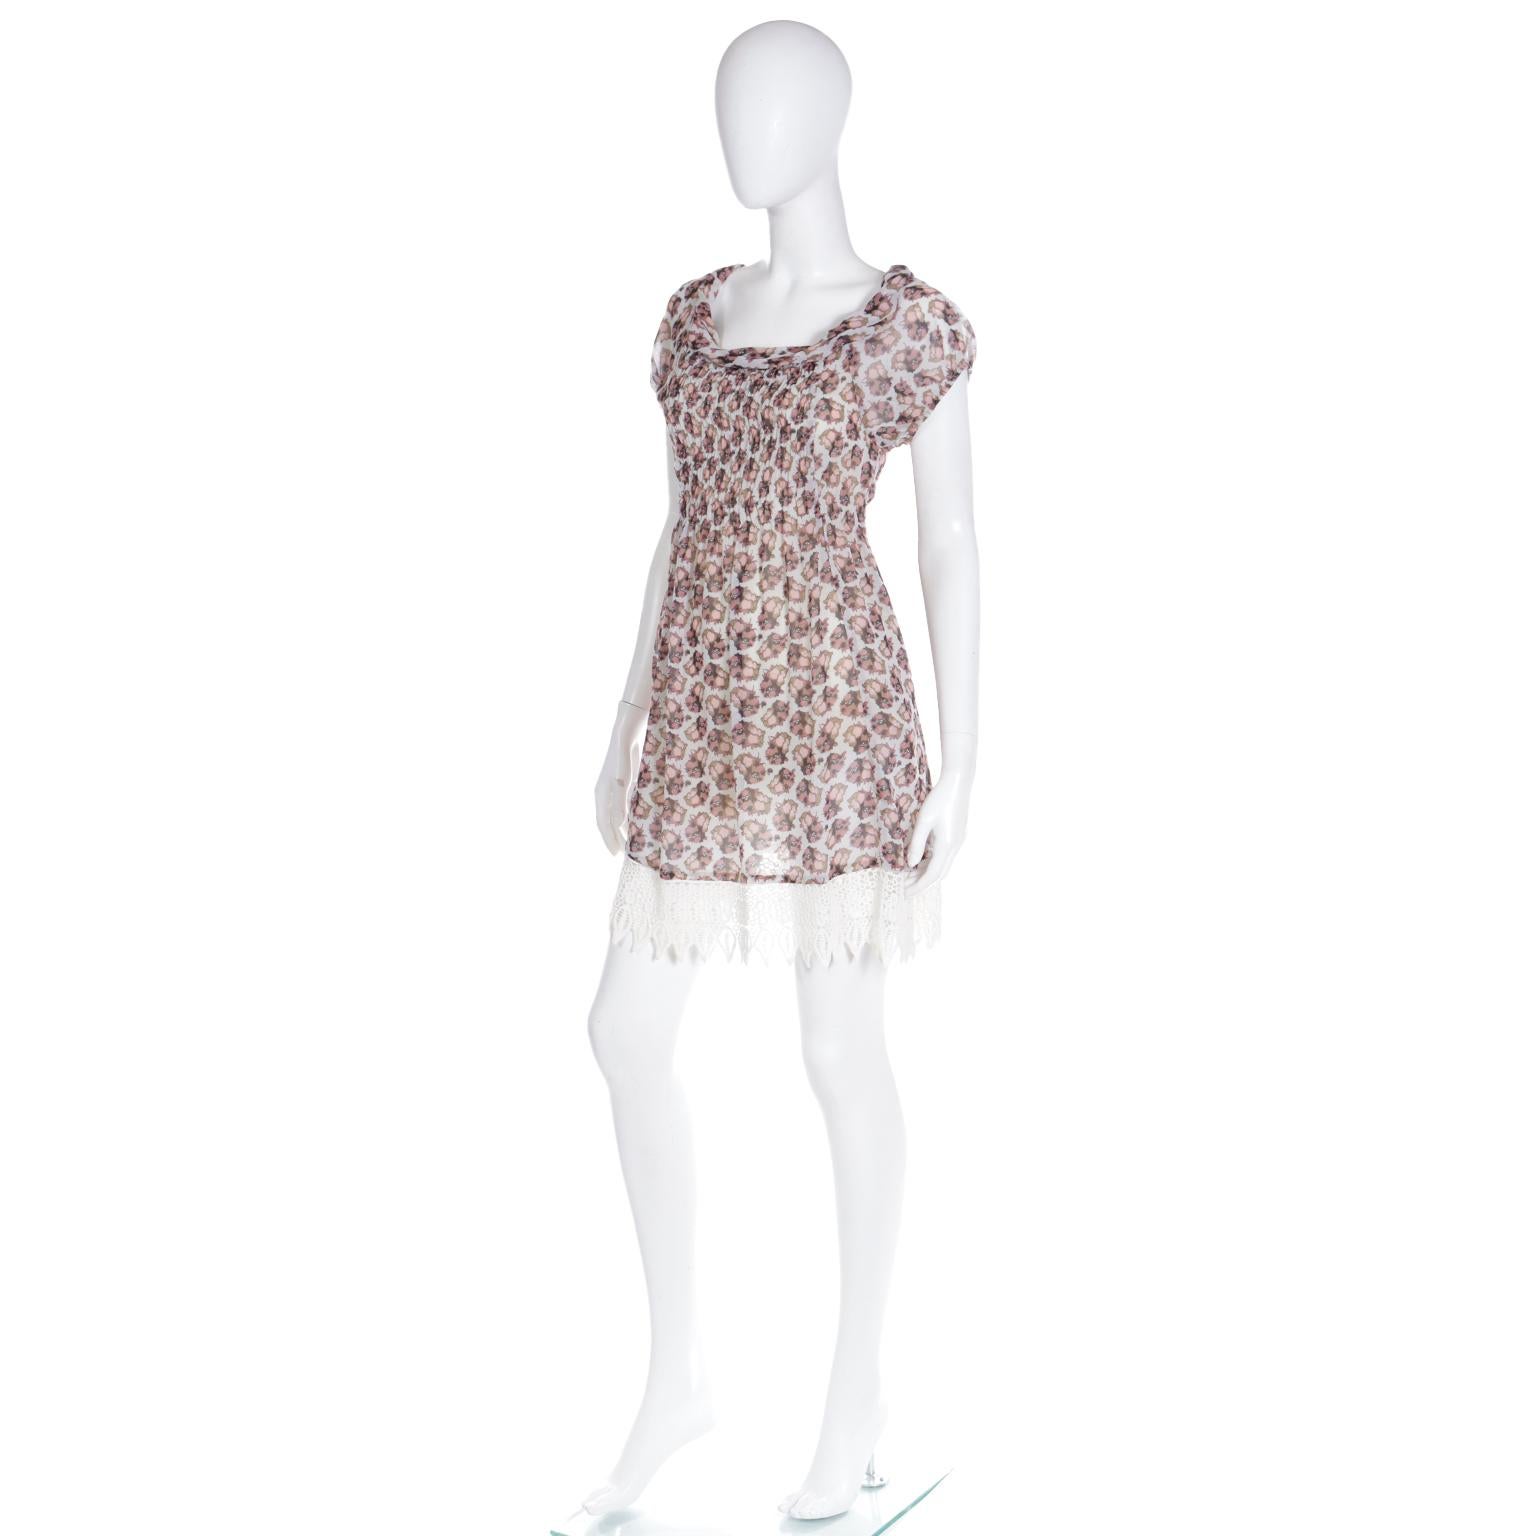 Dries Van Noten Floral Mini Dress With Crochet Lace Hem In Excellent Condition For Sale In Portland, OR